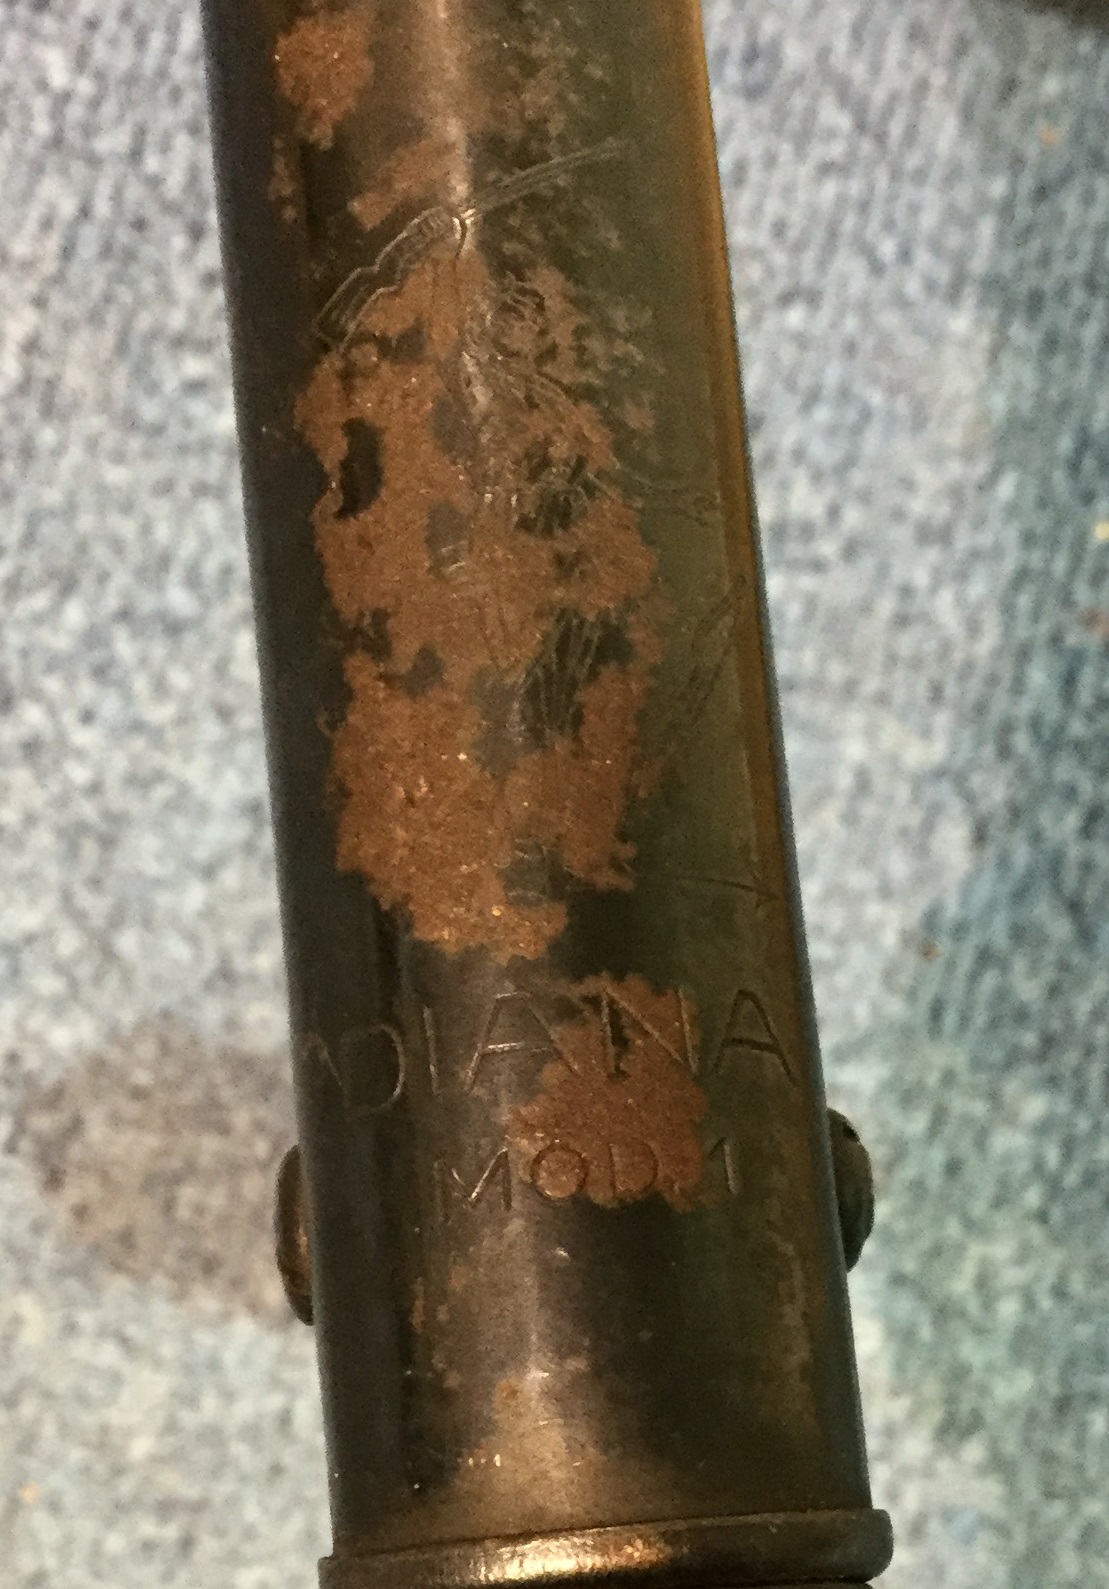 Diana Model 1 Air Rifle .177 cal. Marked "Foreign". Much original finish remaining. Working order. - Image 3 of 3